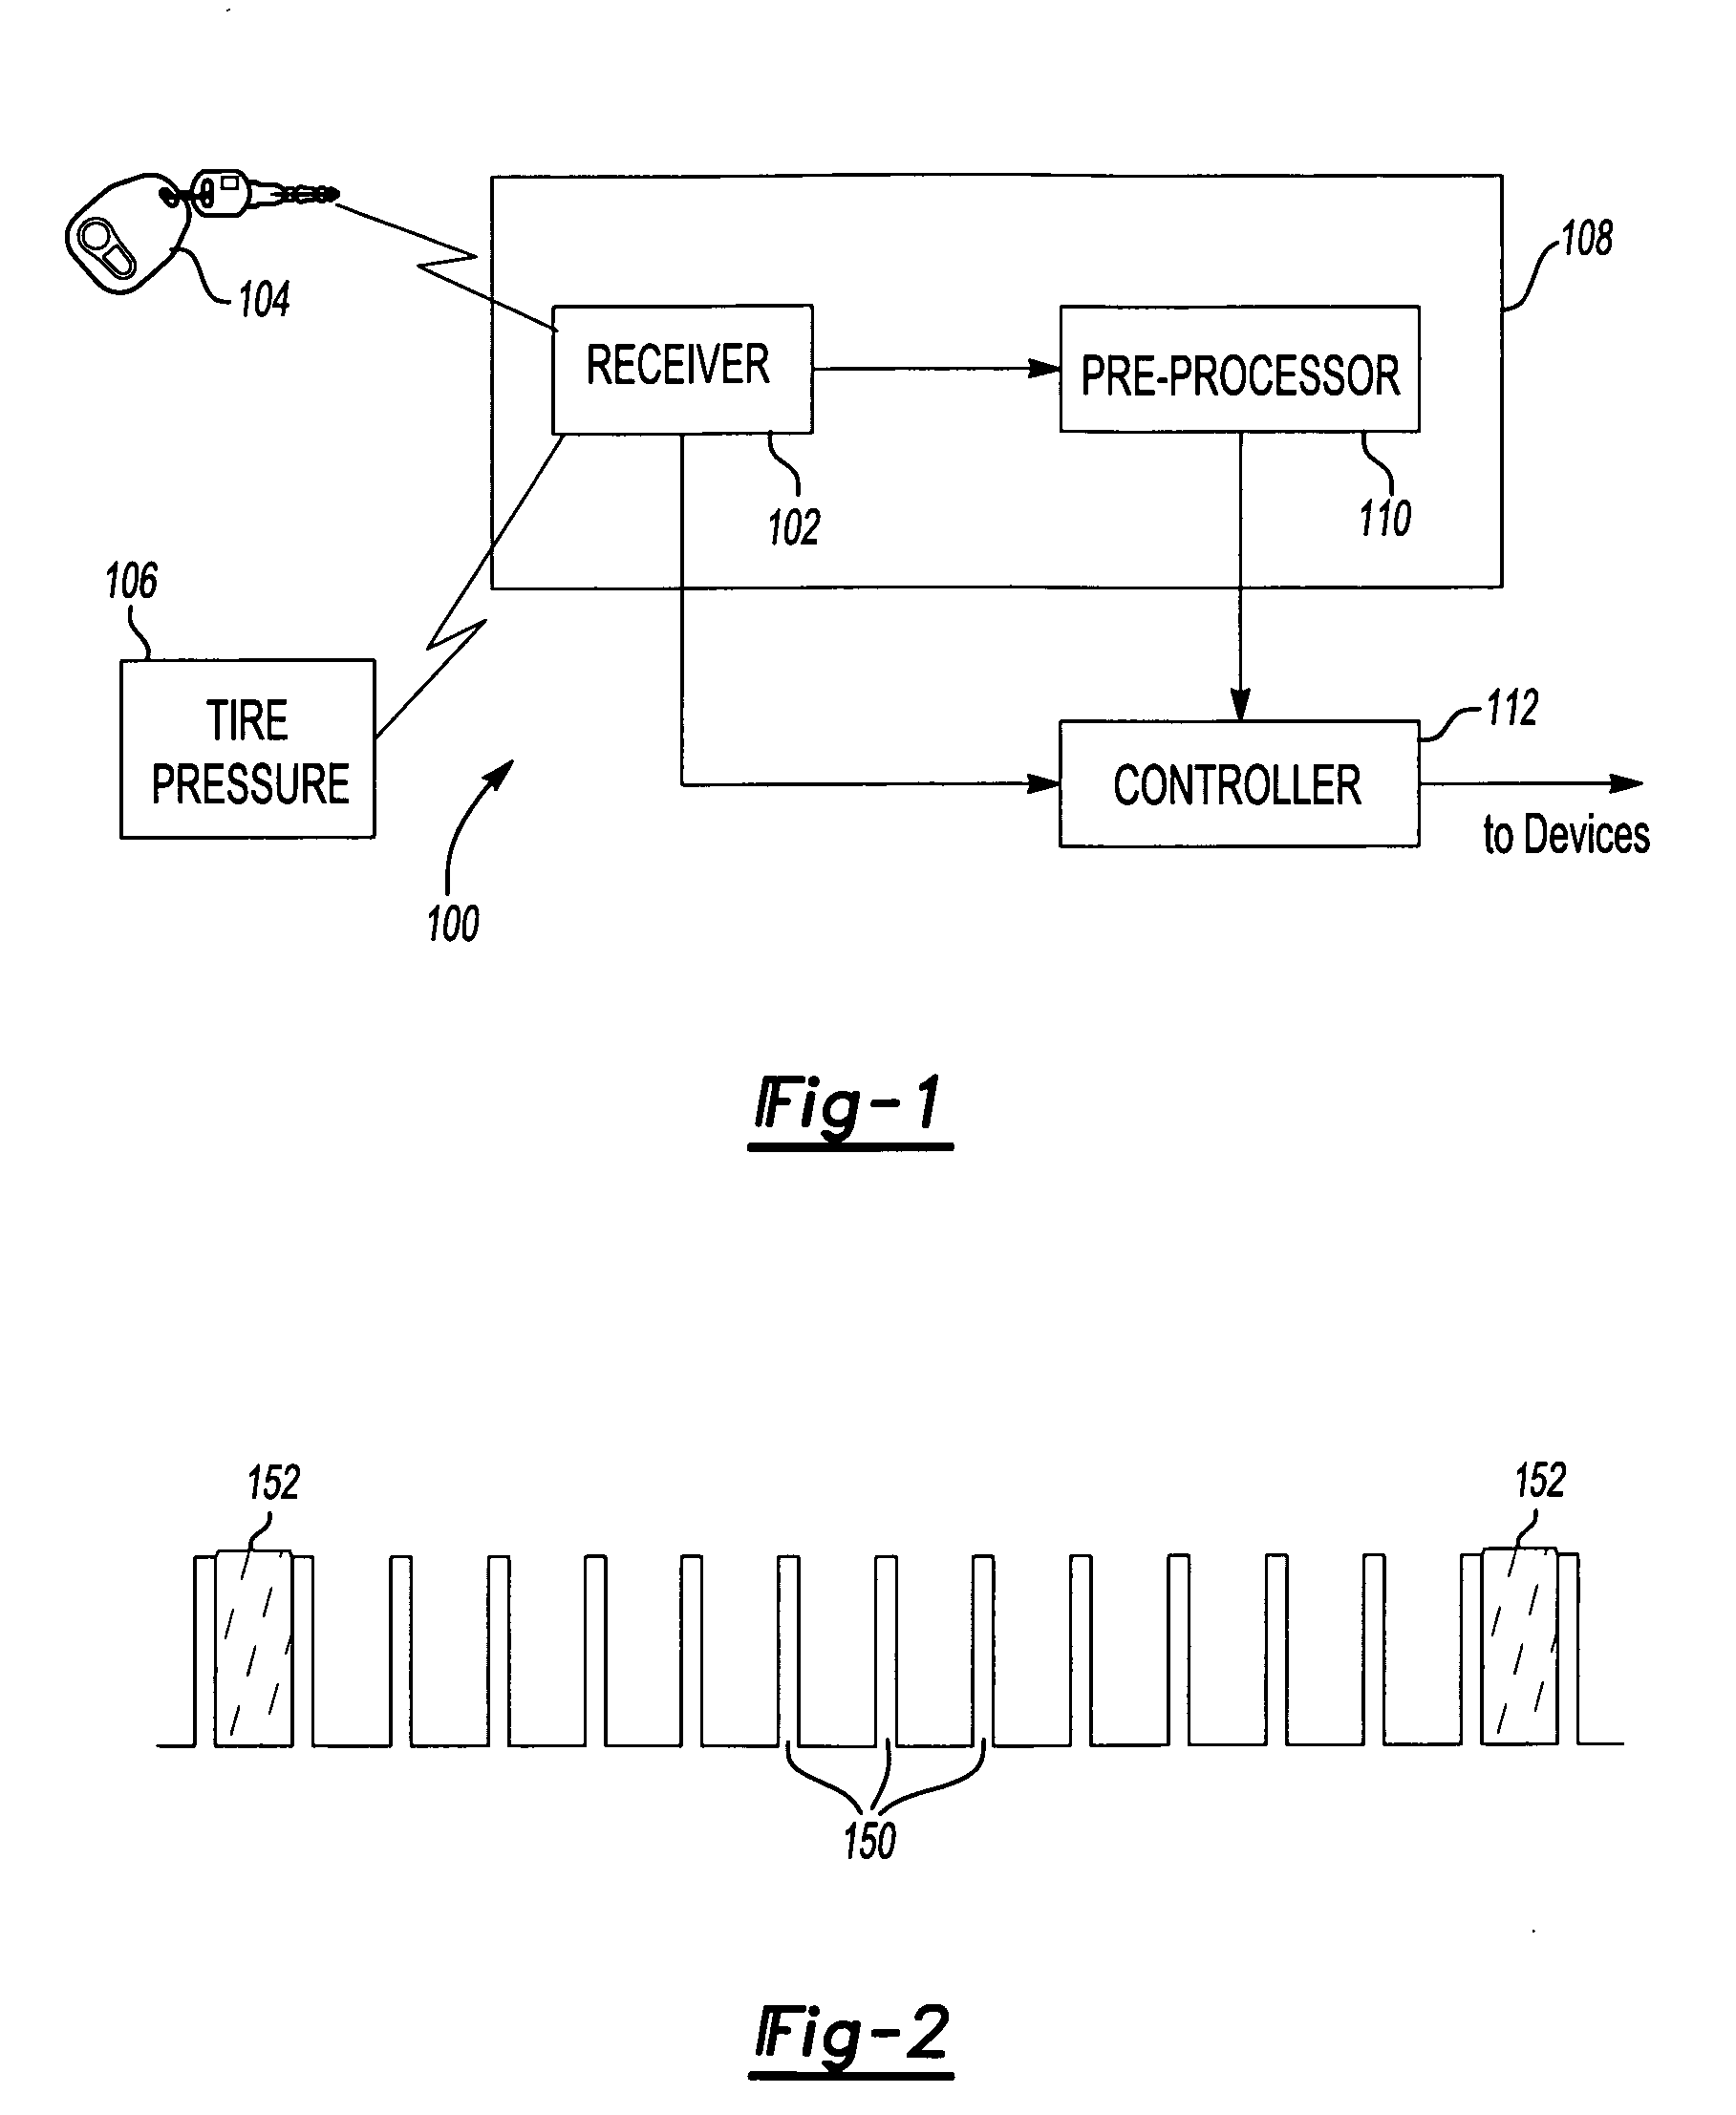 Tire pressure monitoring and remote keyless entry system using asynchronous duty cycling